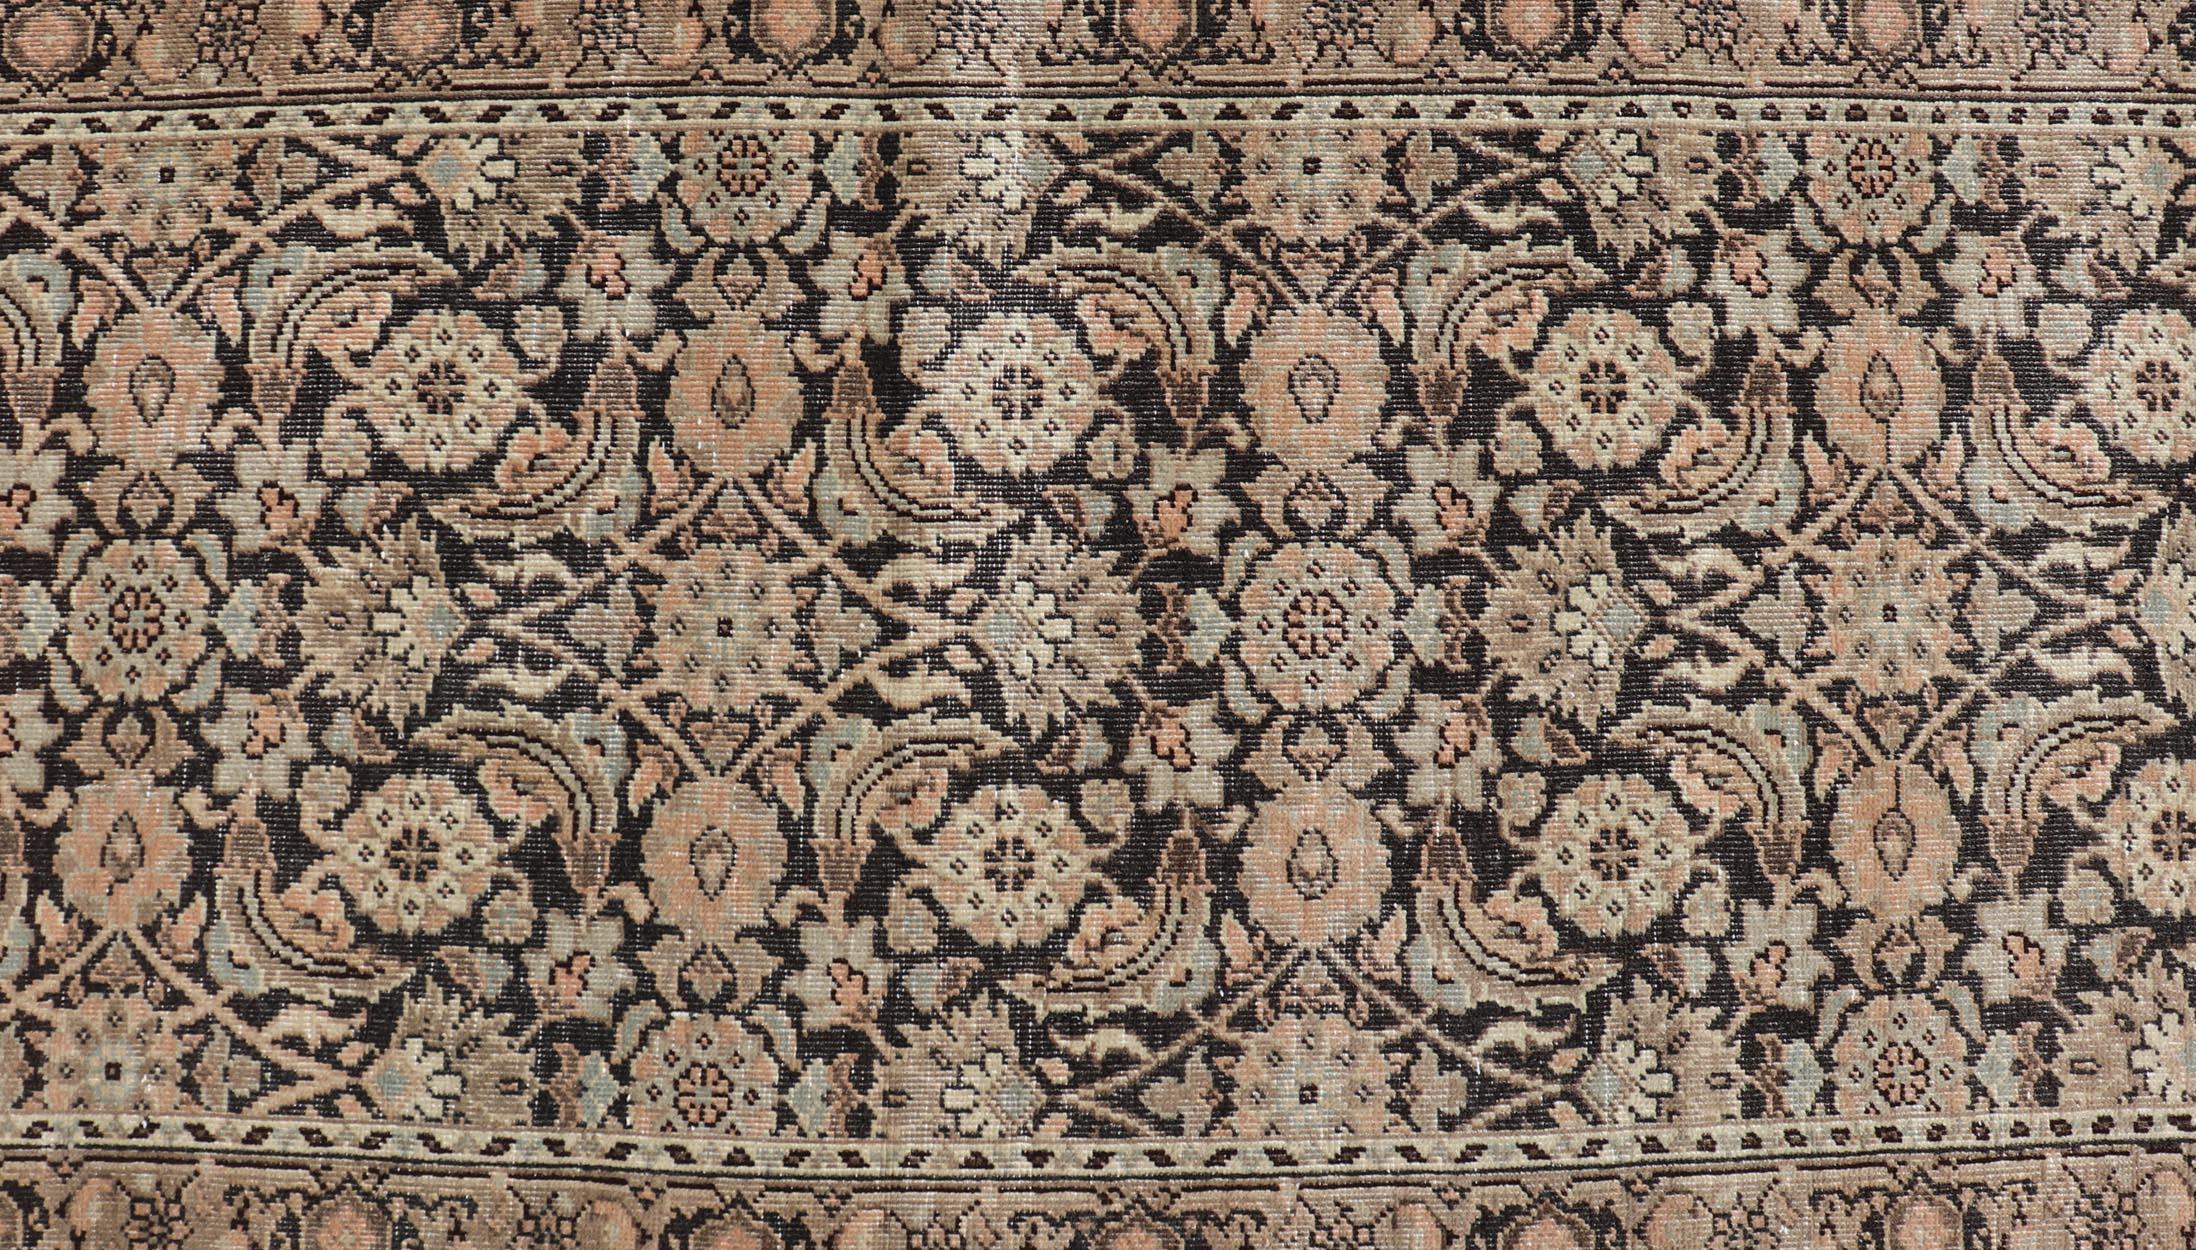 Antique Persian Tabriz Runner with Ornate Floral Design in Earthy Tones. Keivan Woven Arts / EMB-22135-15027, country of origin / type: Iran / Tabriz, circa 1920.

Measures: 2'8 x 9'4 

This Persian runner with a sophisticated, all-over design